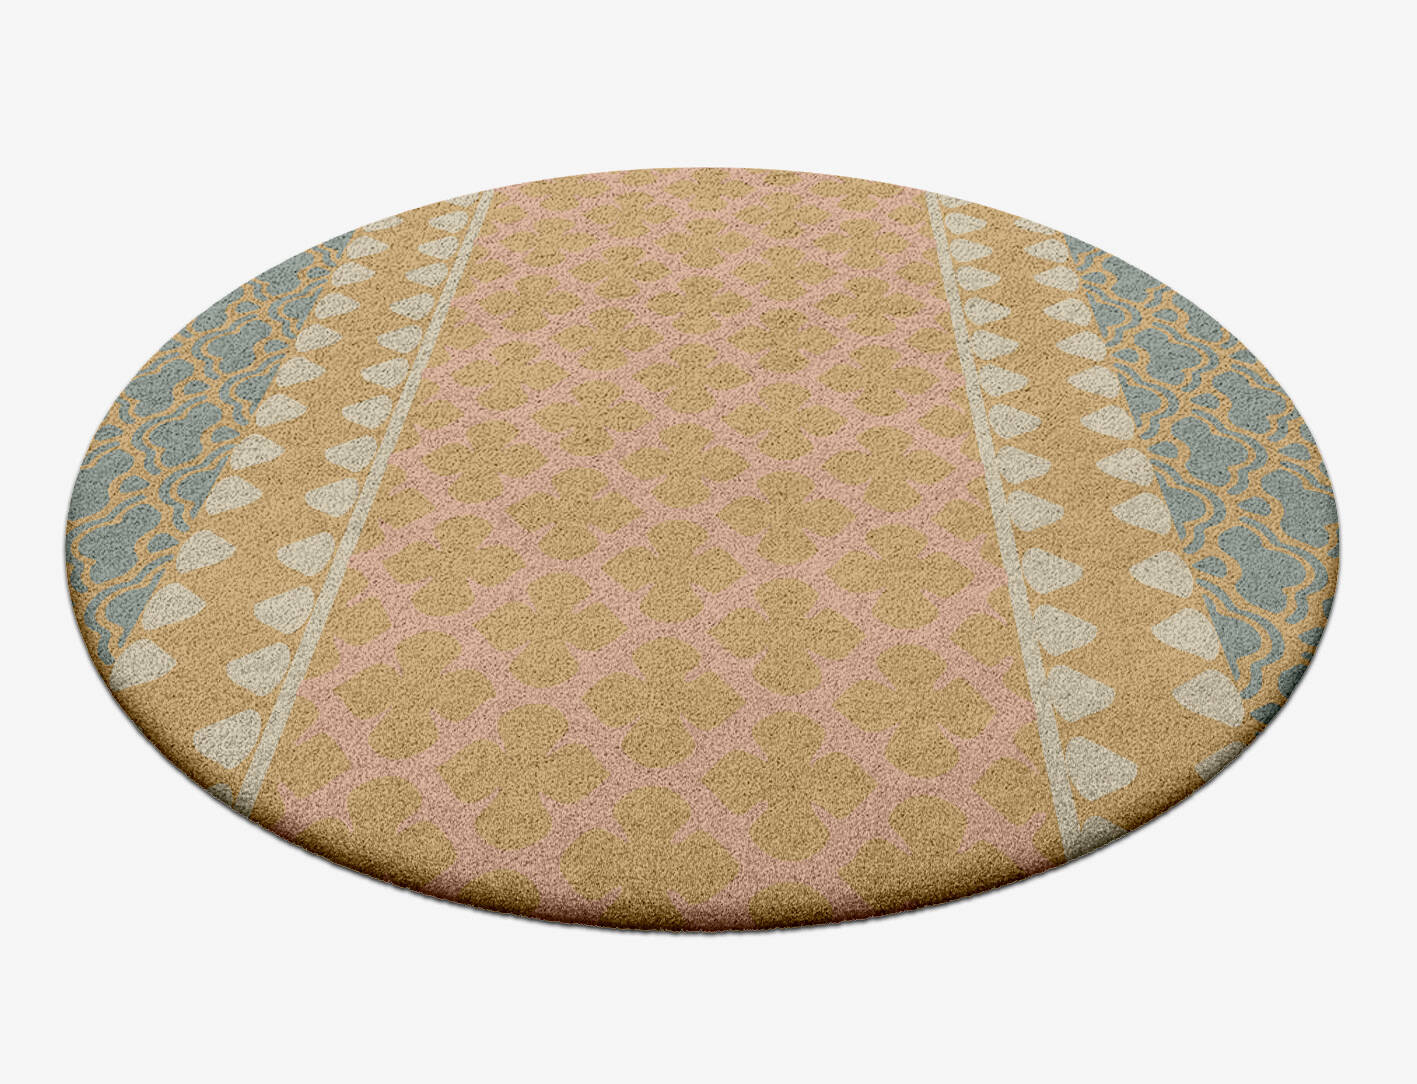 Alhambra Blue Royal Round Hand Tufted Pure Wool Custom Rug by Rug Artisan